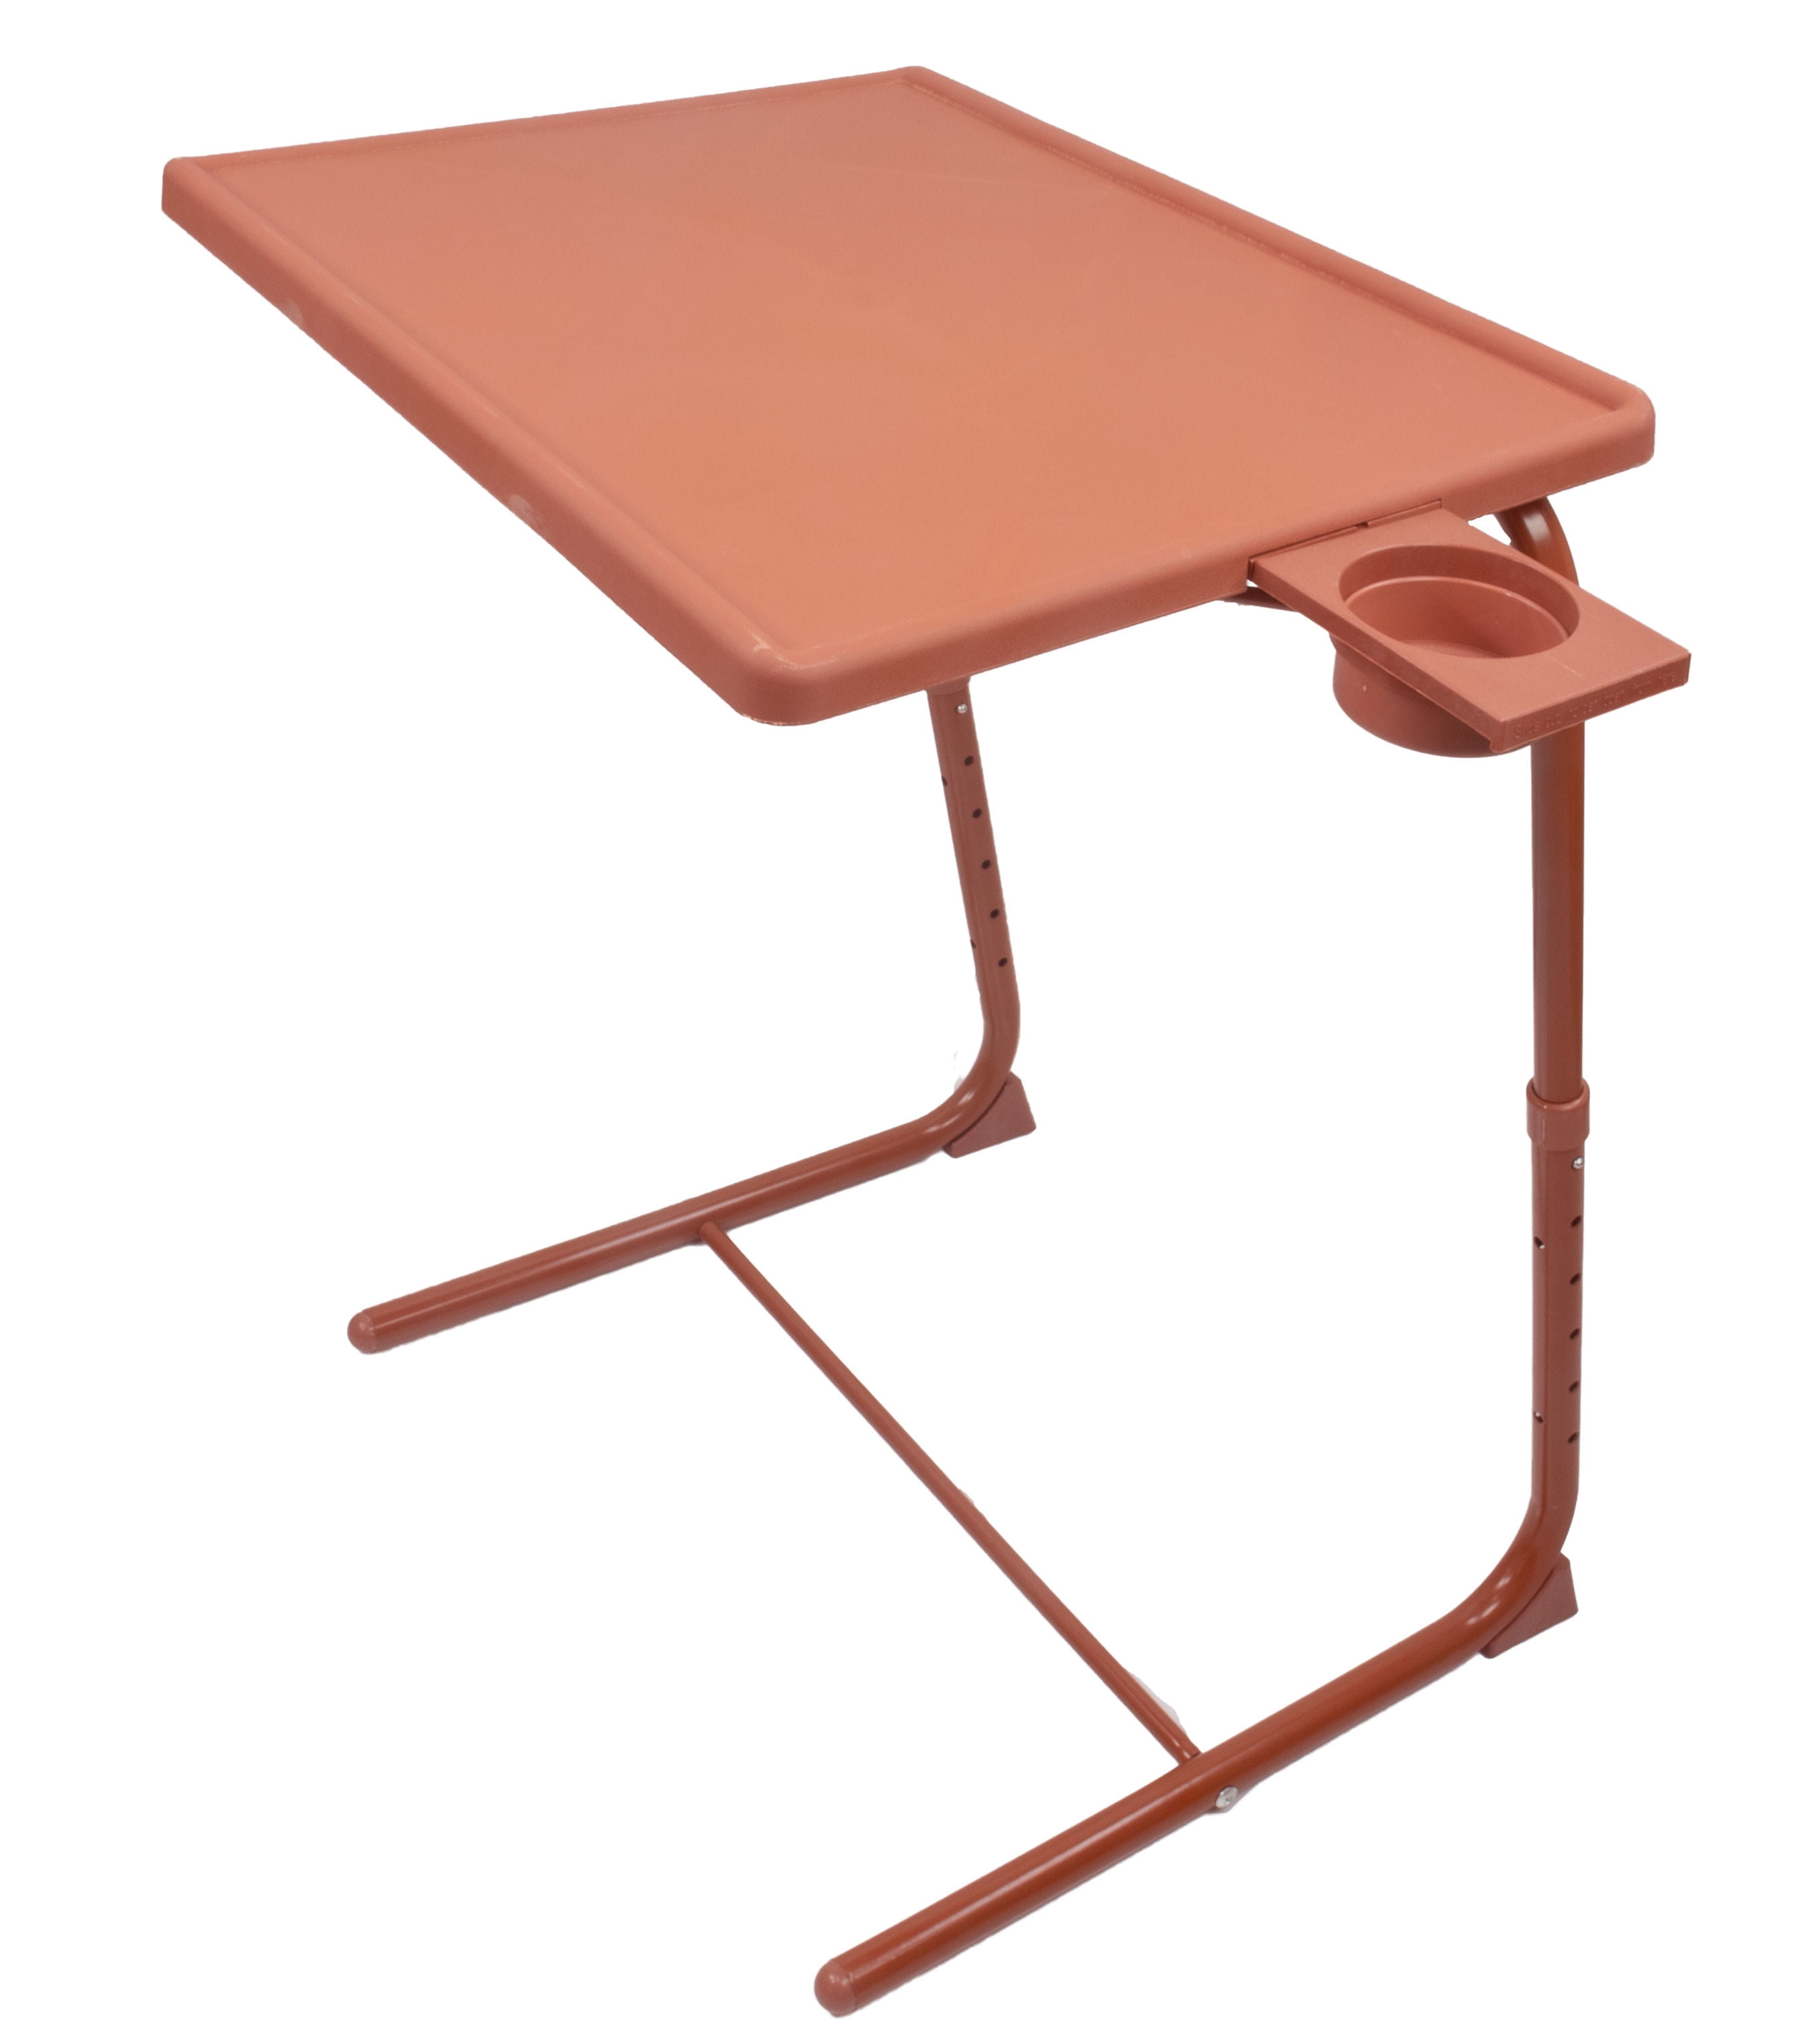 Upgrade Deluxe - Portable Foldable Comfortable TV Tray Table - Laptop, Eating, Drawing Tray Table Stand - Adjustable Height & Angle Tray - Sliding Adjustable Cup Holder - Upgraded Stability - Brown